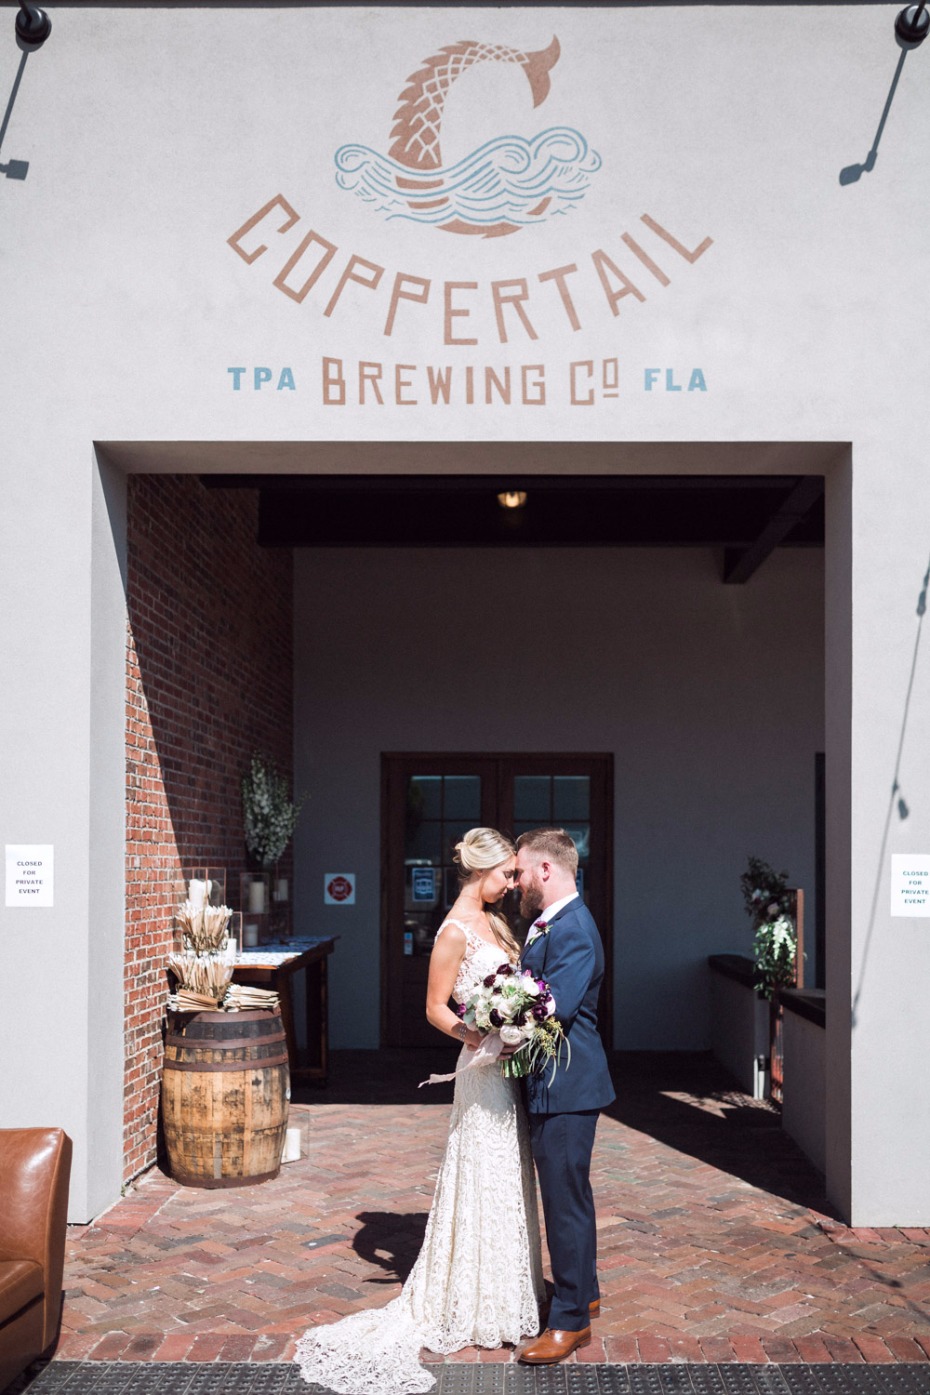 Coppertail brewery wedding